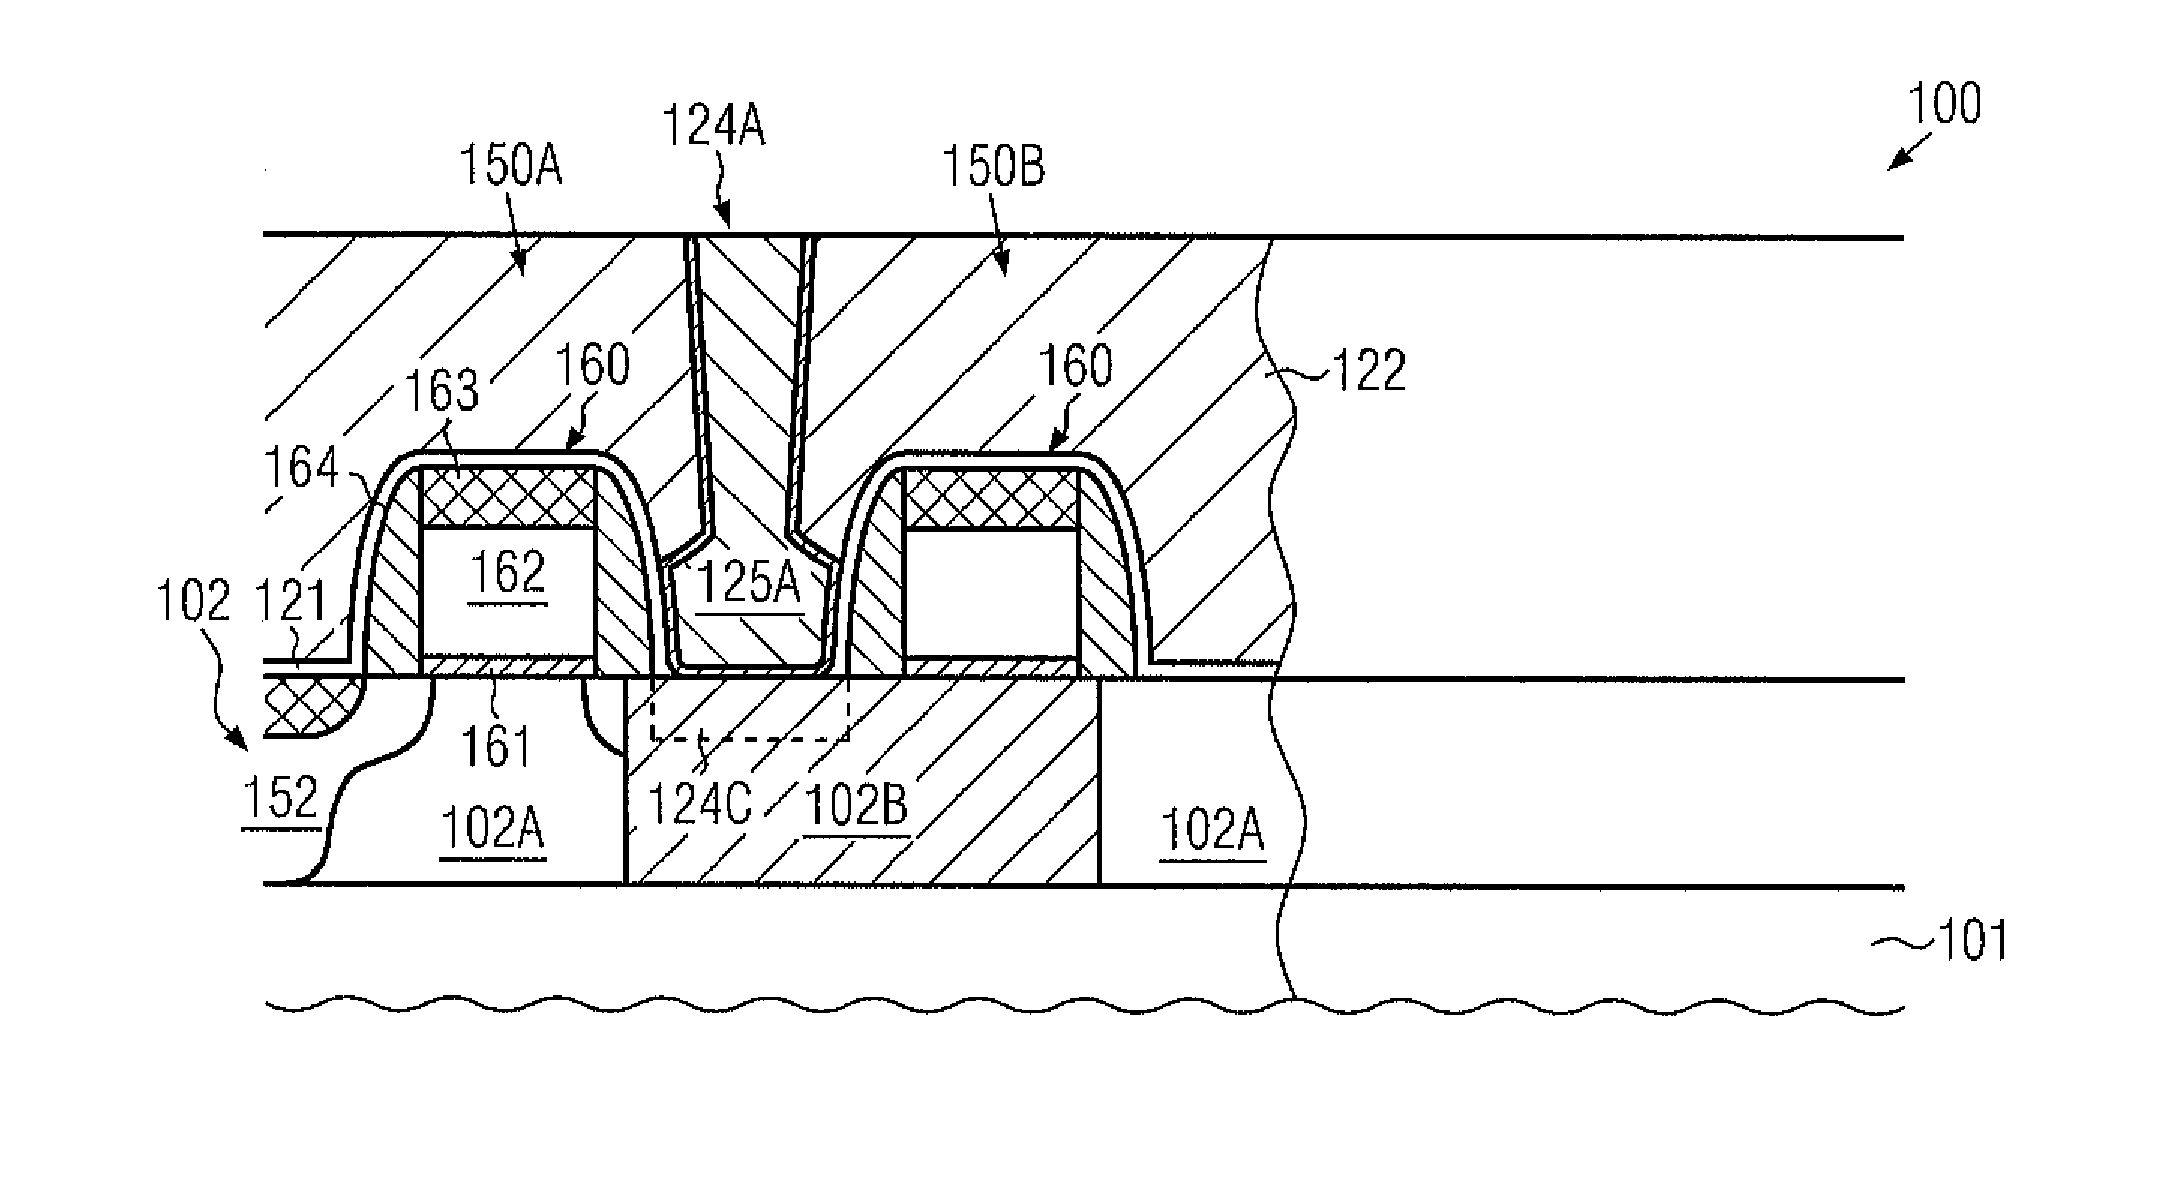 Semiconductor device comprising a buried capacitor formed in the contact level